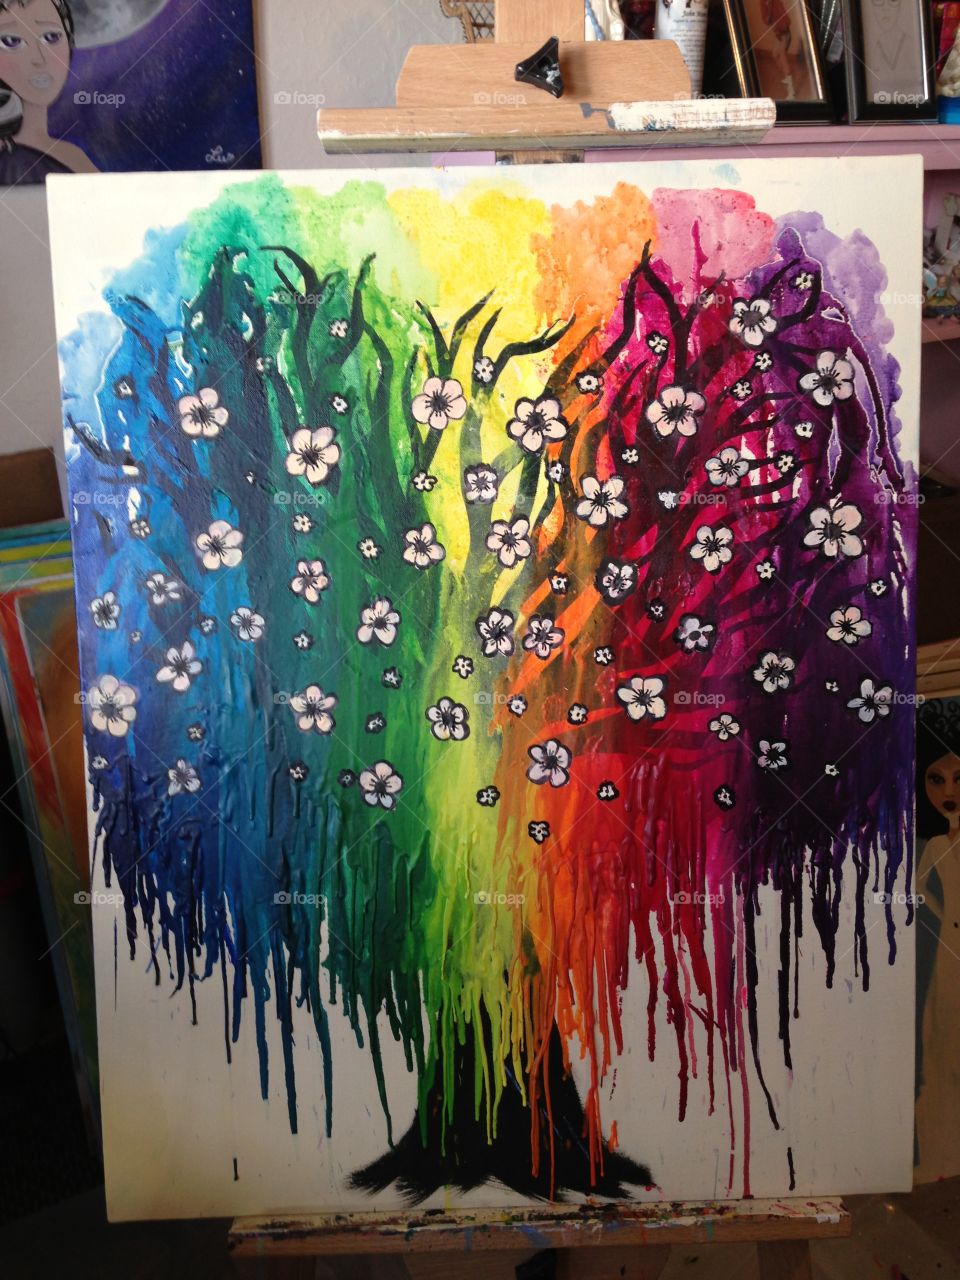 Rainbow Willow ( melted crayon)